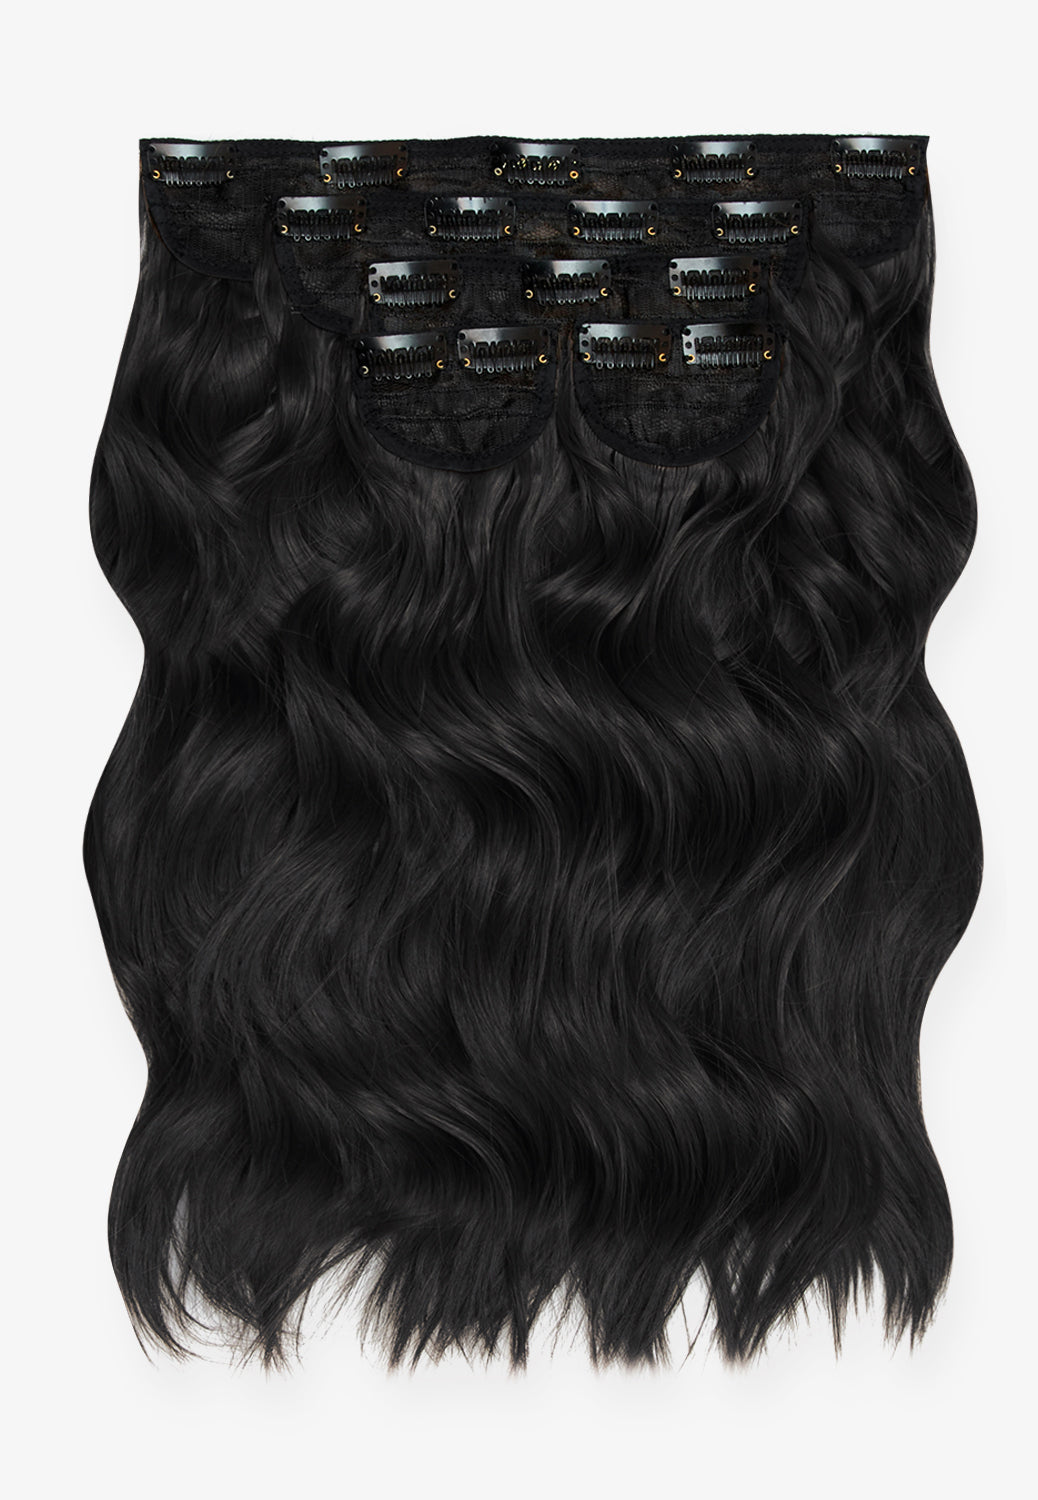 Super Thick 16’’ 5 Piece Brushed Out Wave Clip In Hair Extensions + Hair Care Bundle - Natural Black